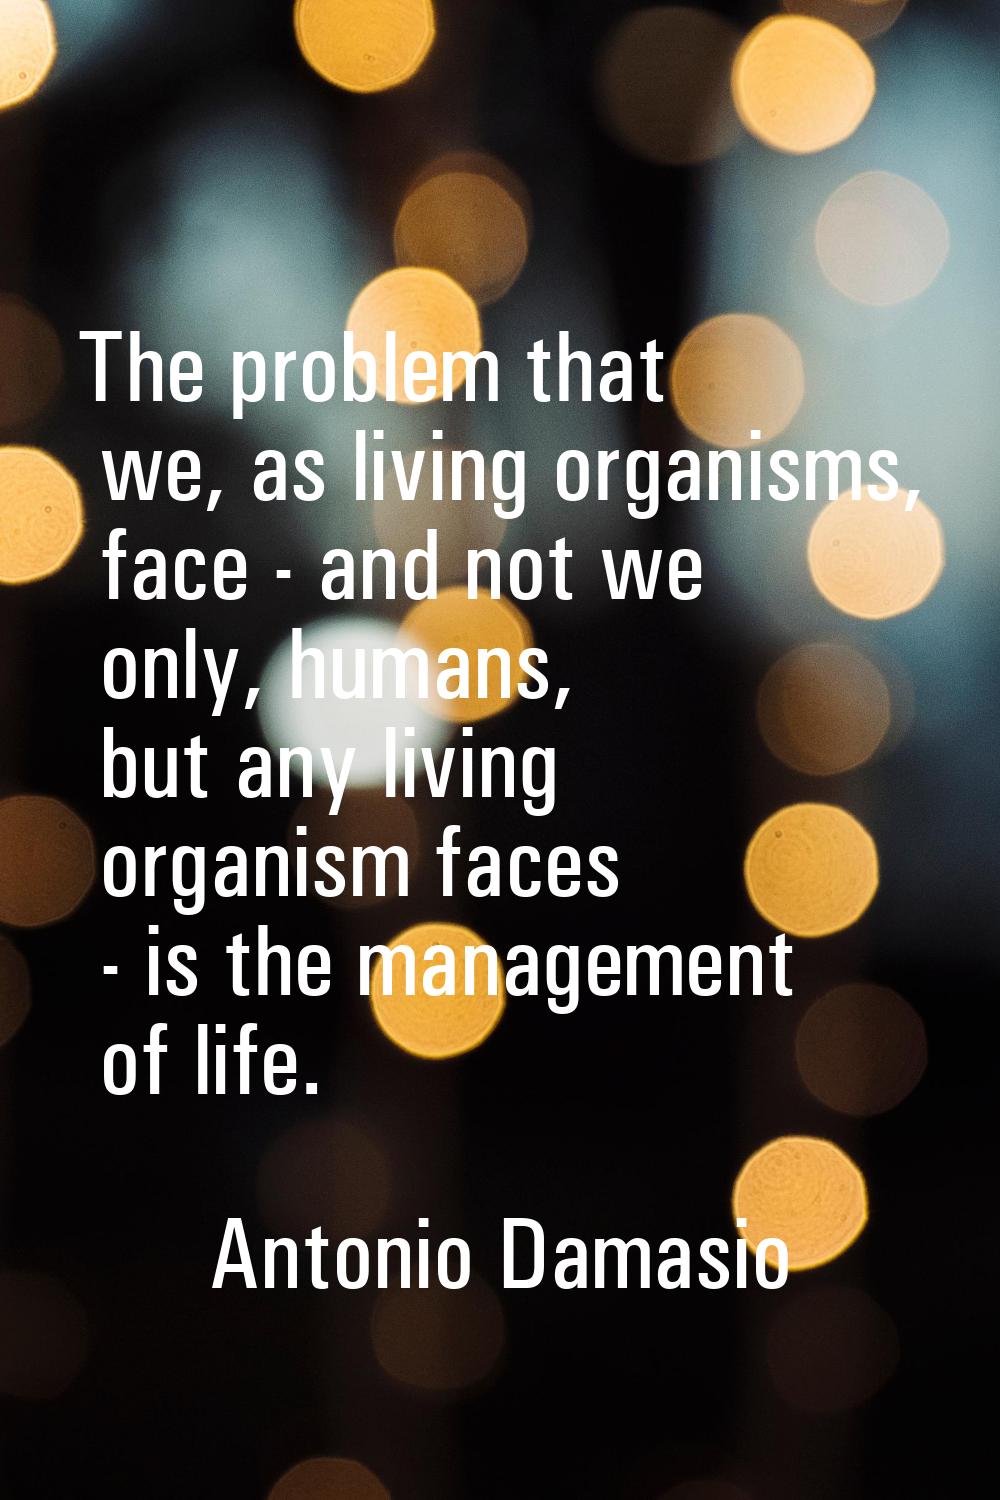 The problem that we, as living organisms, face - and not we only, humans, but any living organism f